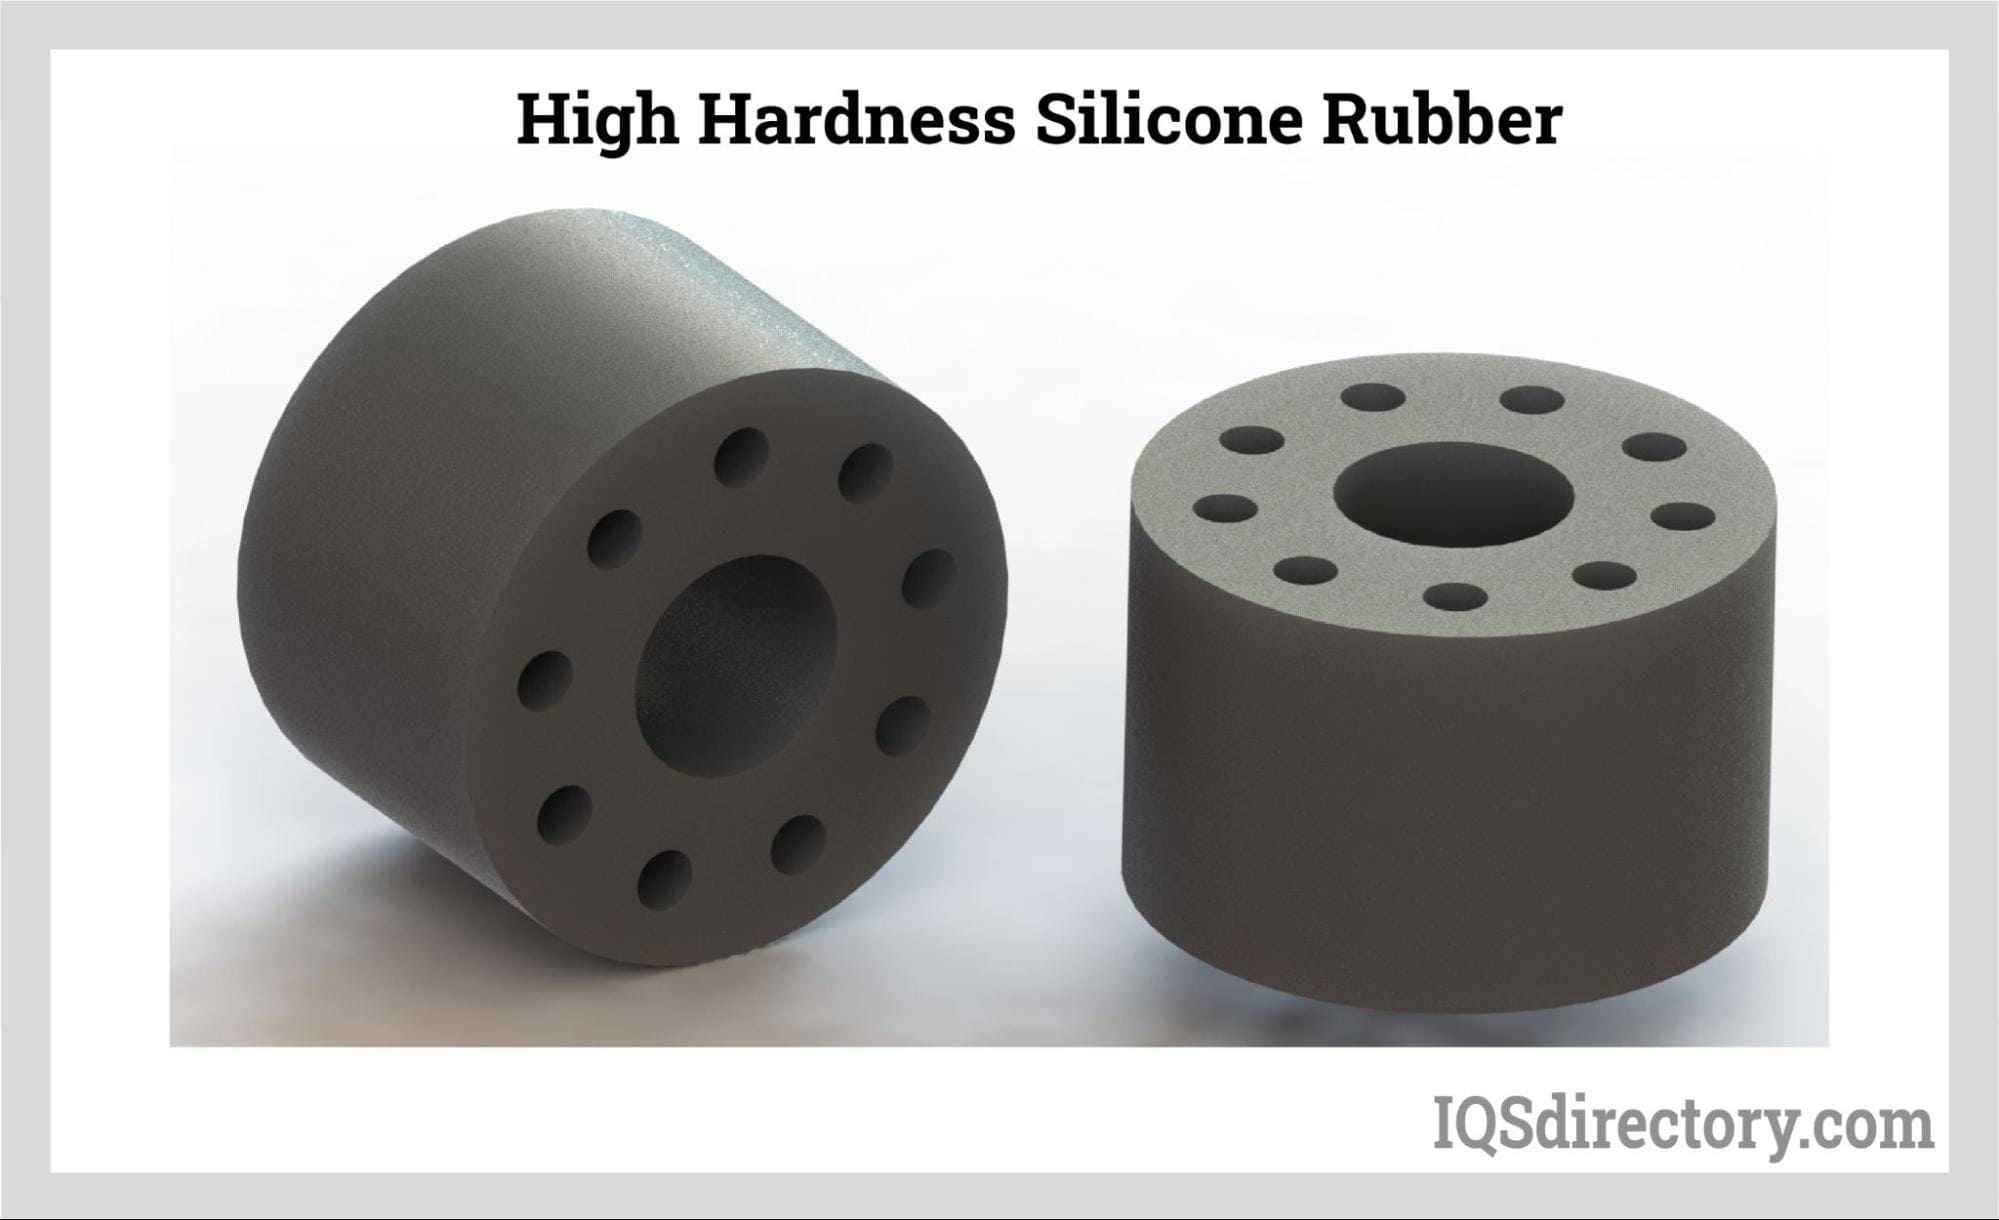 High Hardness Silicone Rubber